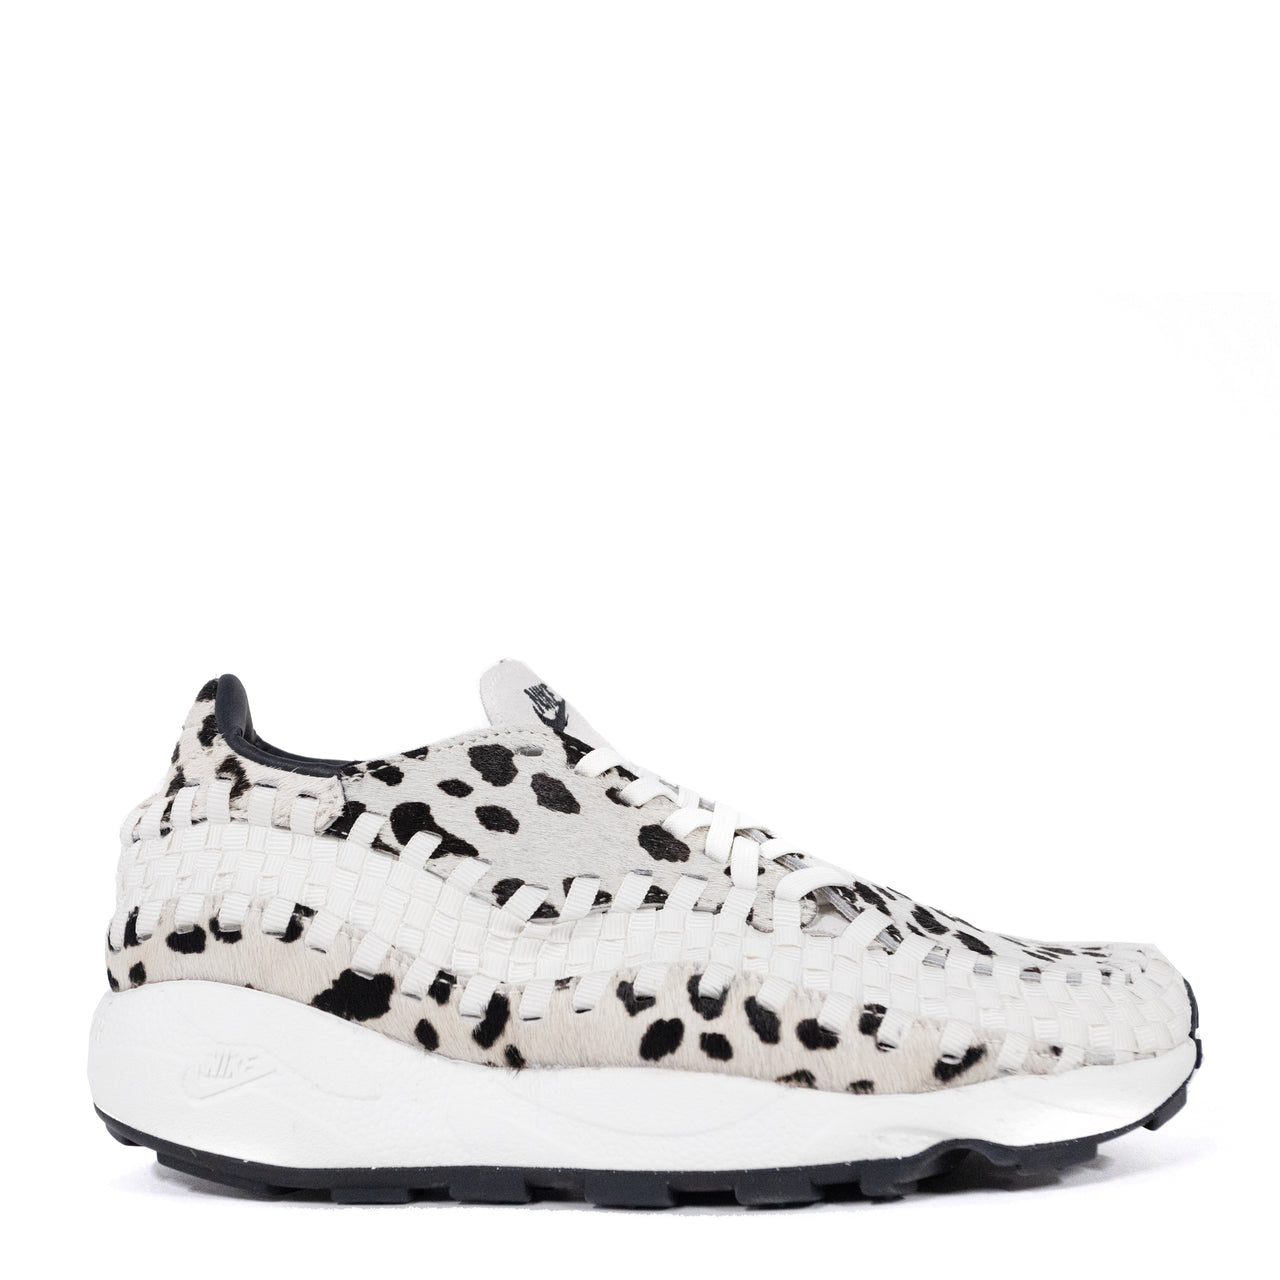 WMNS AIR FOOTSCAPE WOVEN